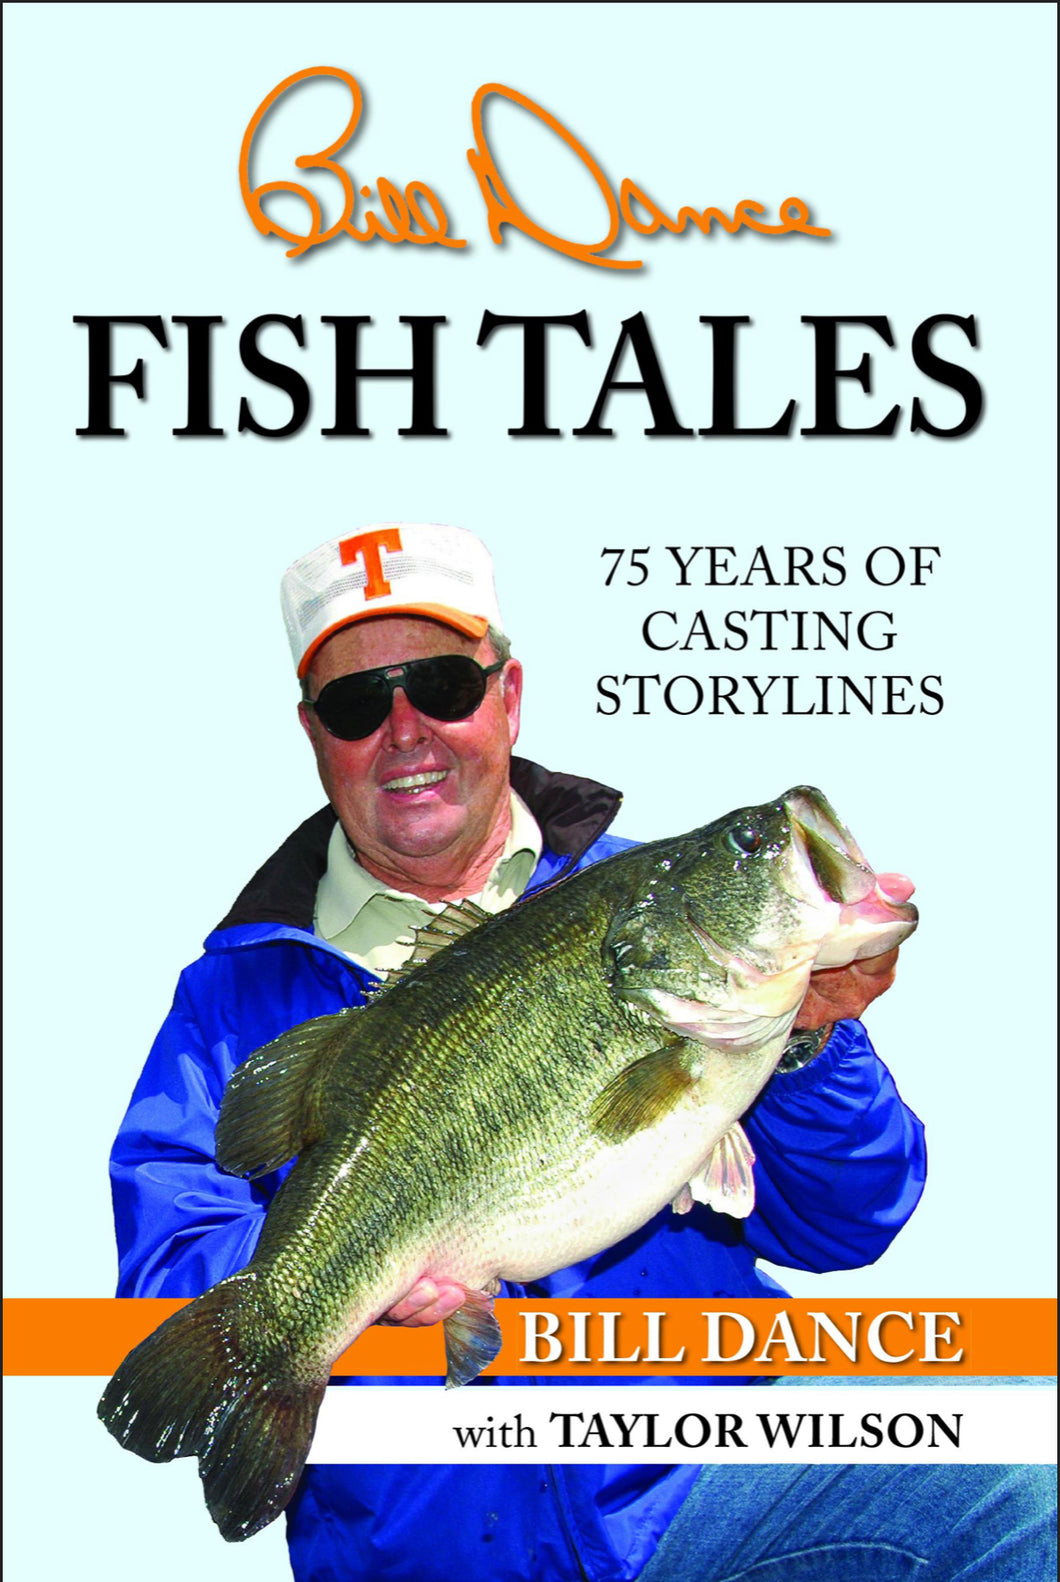 Front cover of Bill Dance Fish Tales hardcover book